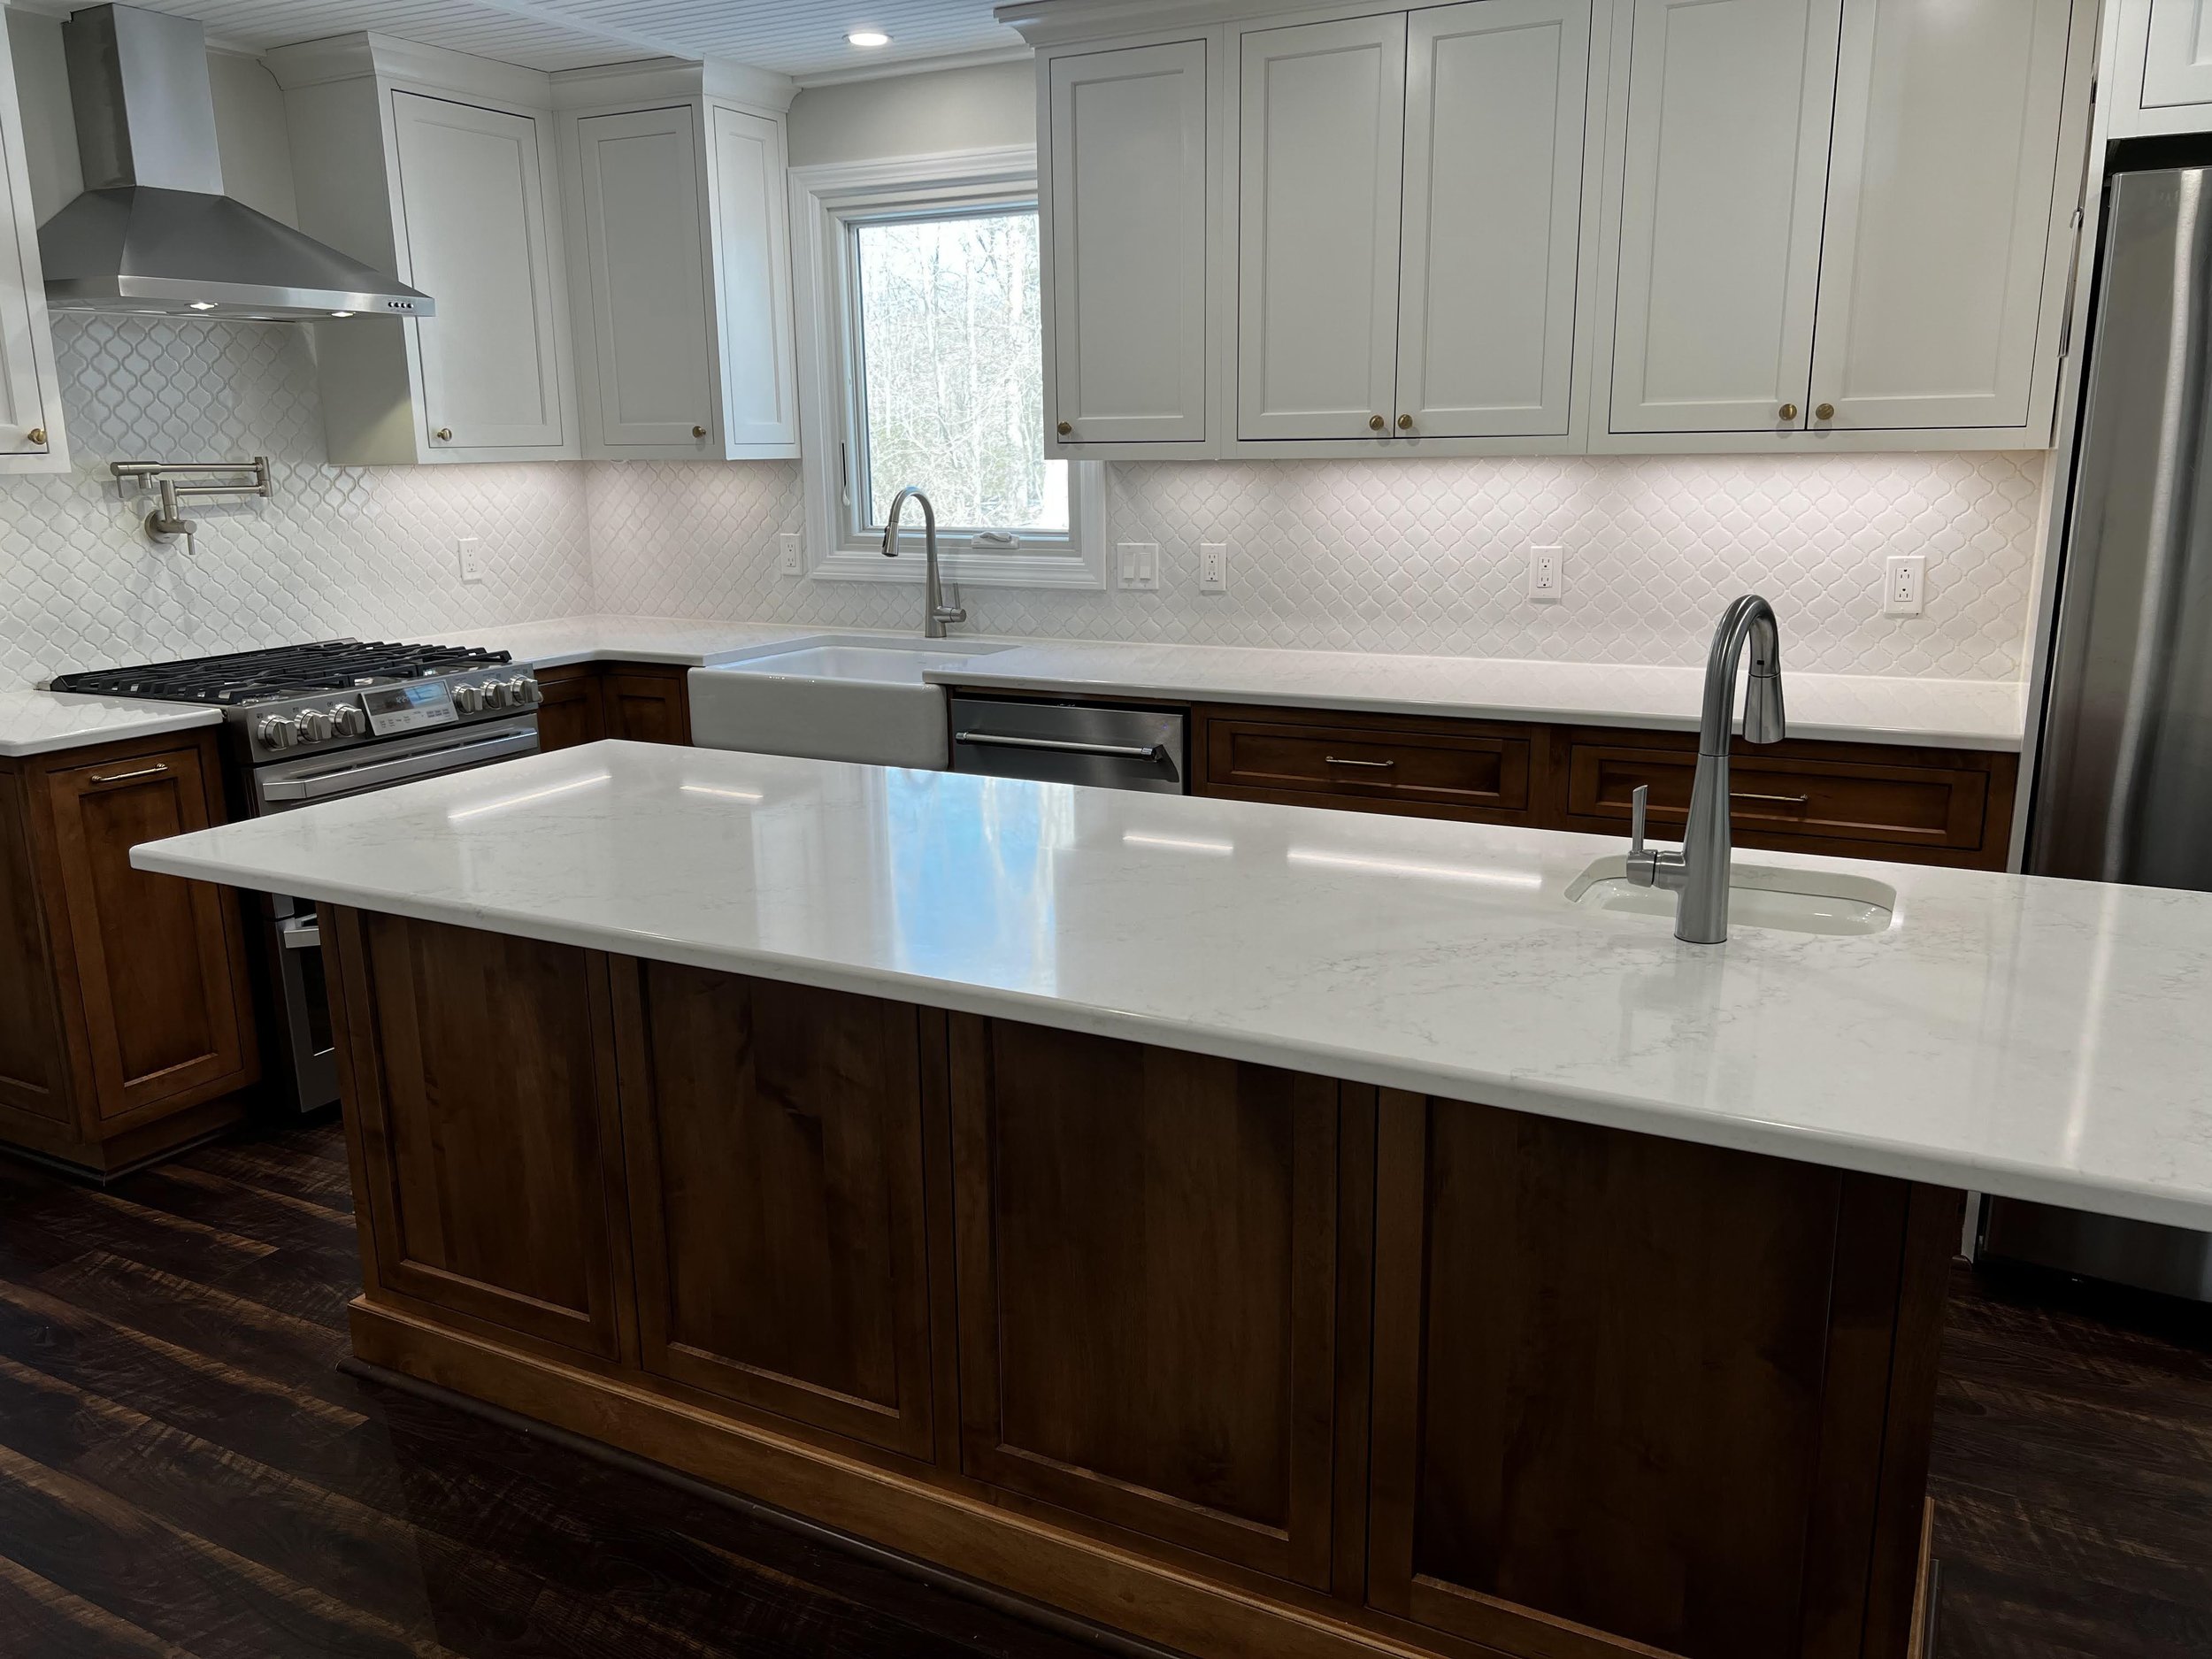 Shaw Remodeling - kitchen design renovations in Niantic East Lyme Old Lyme CT before and after photos makeover (18).jpg